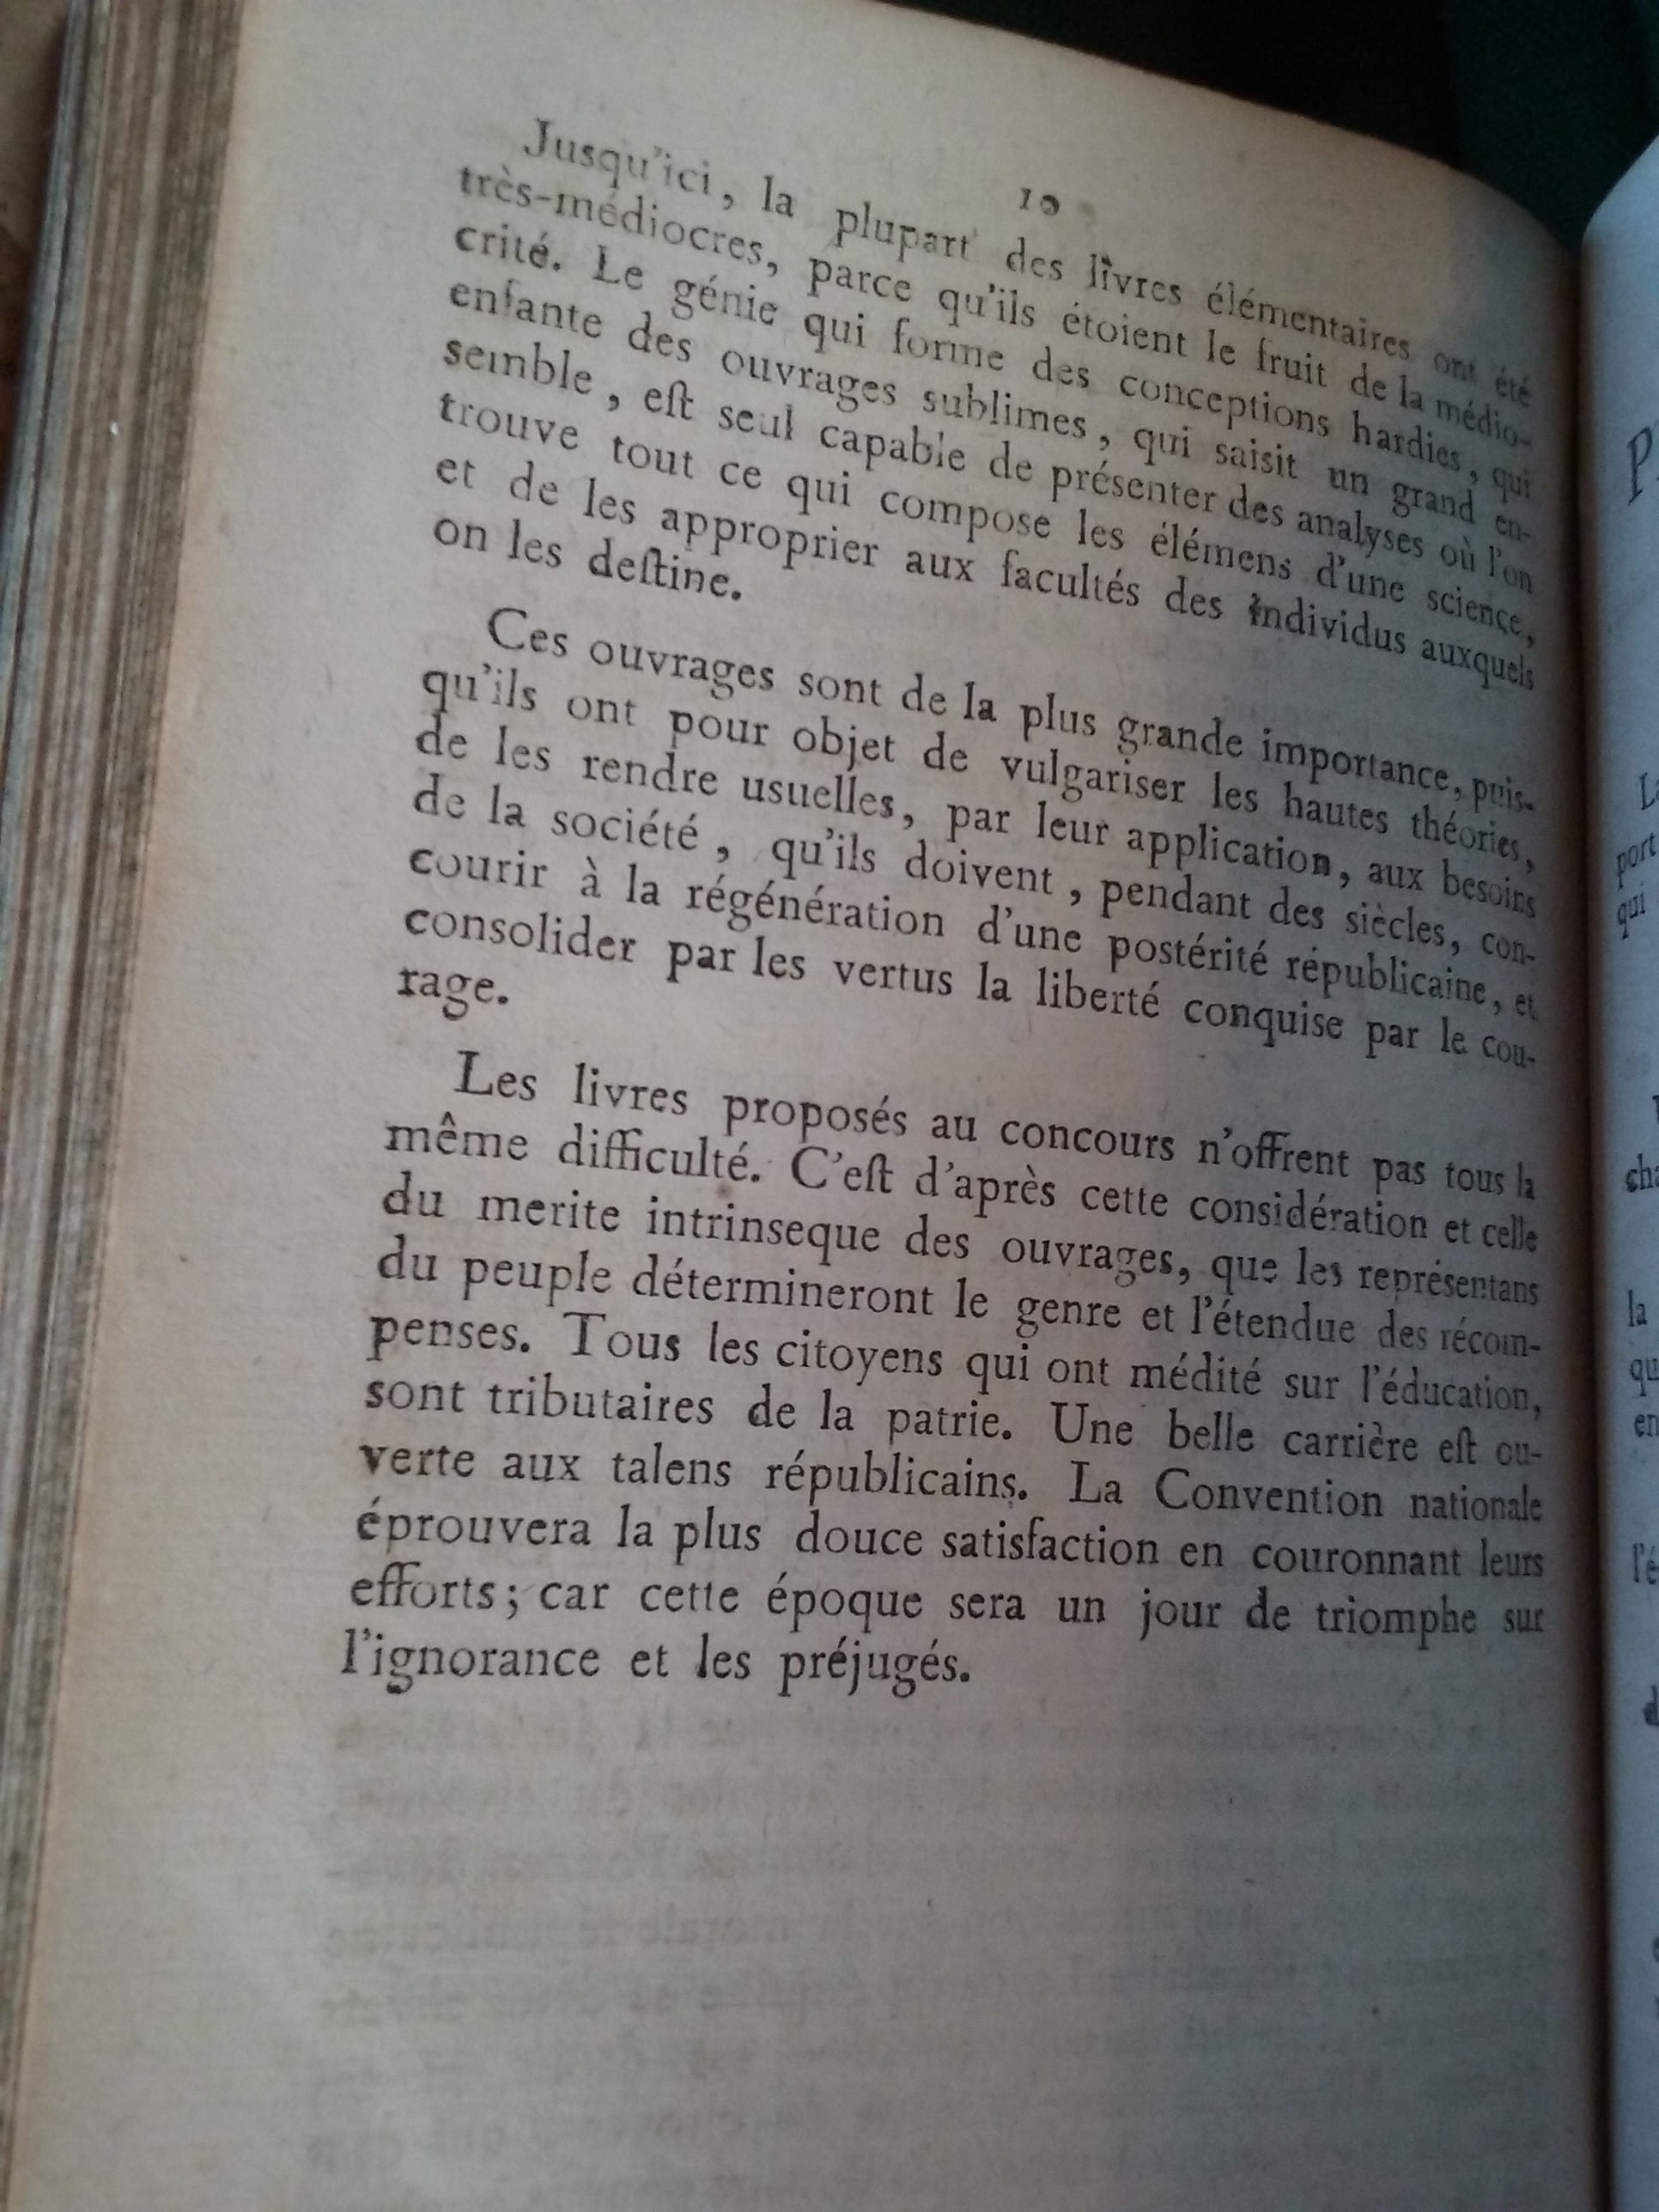 On the last page of the announcement for the textbook competition, the Committee again emphasized the importance of education in defeating prejudices. Bibliothèque Historique de la Ville de Paris.